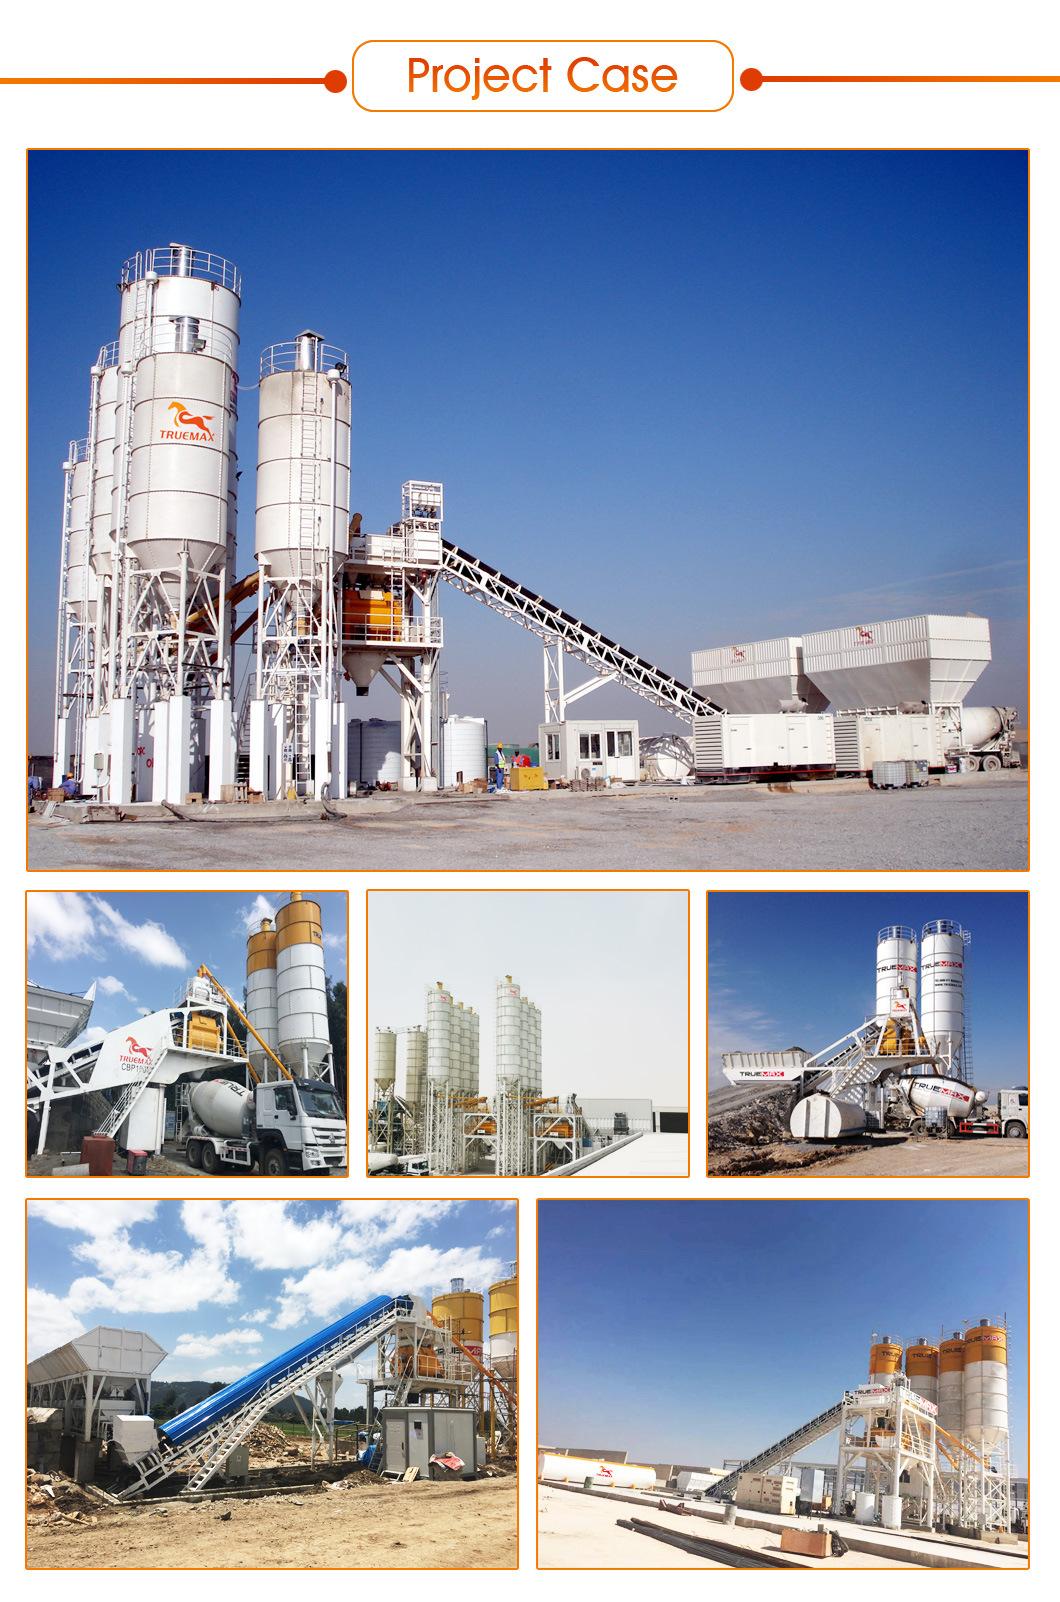 2016 Popular Stationary Concrete Batching Plant with Capacity 120m3/H